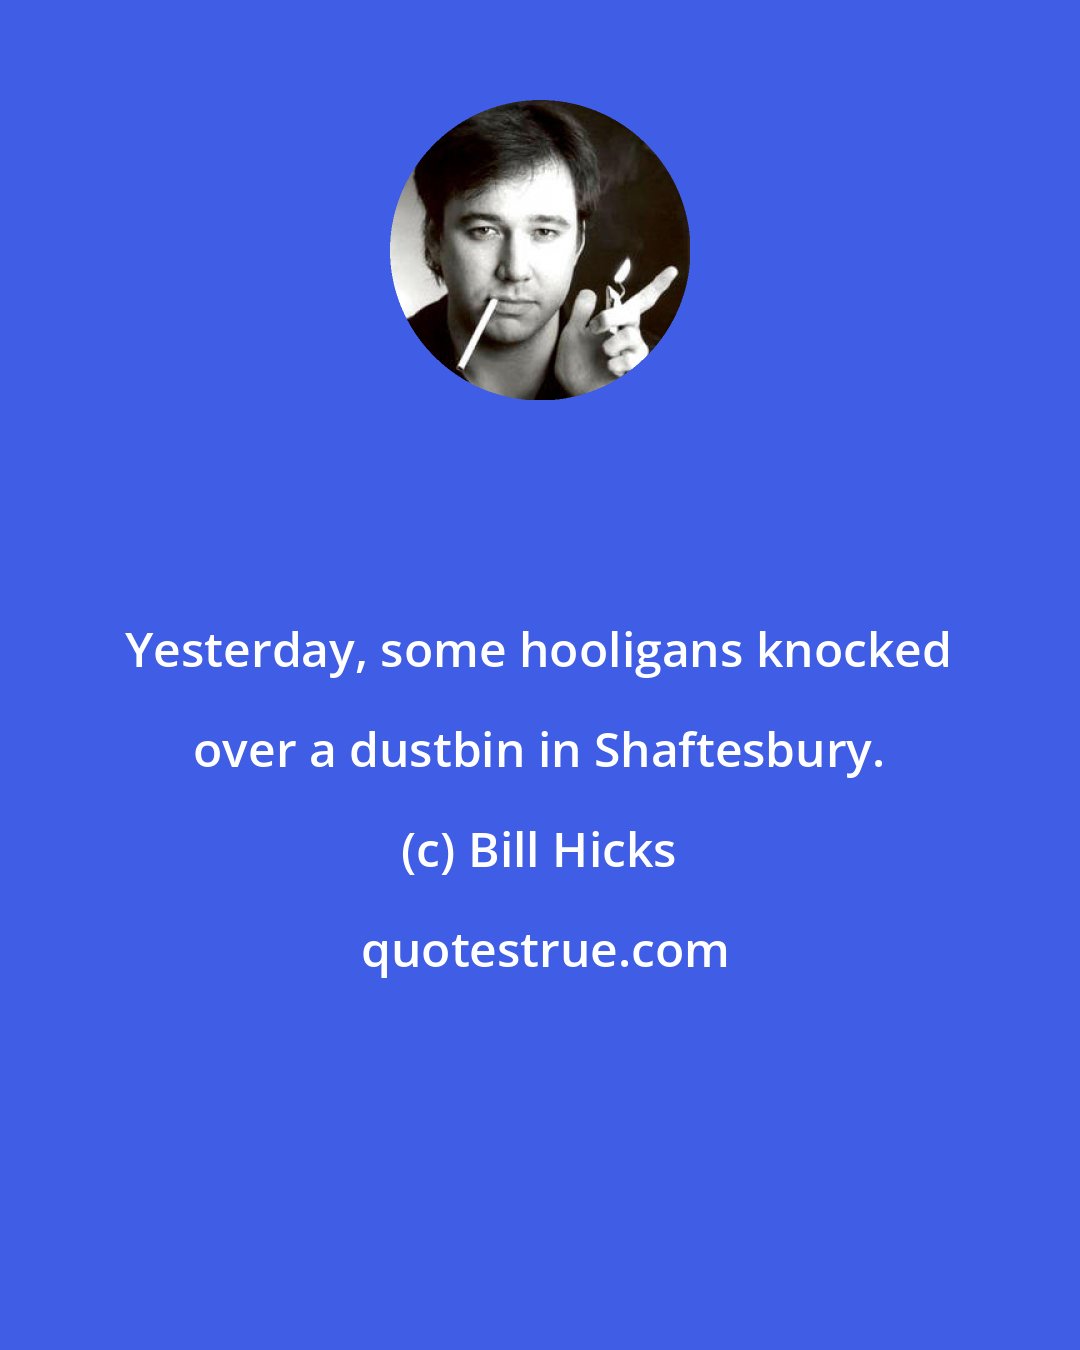 Bill Hicks: Yesterday, some hooligans knocked over a dustbin in Shaftesbury.